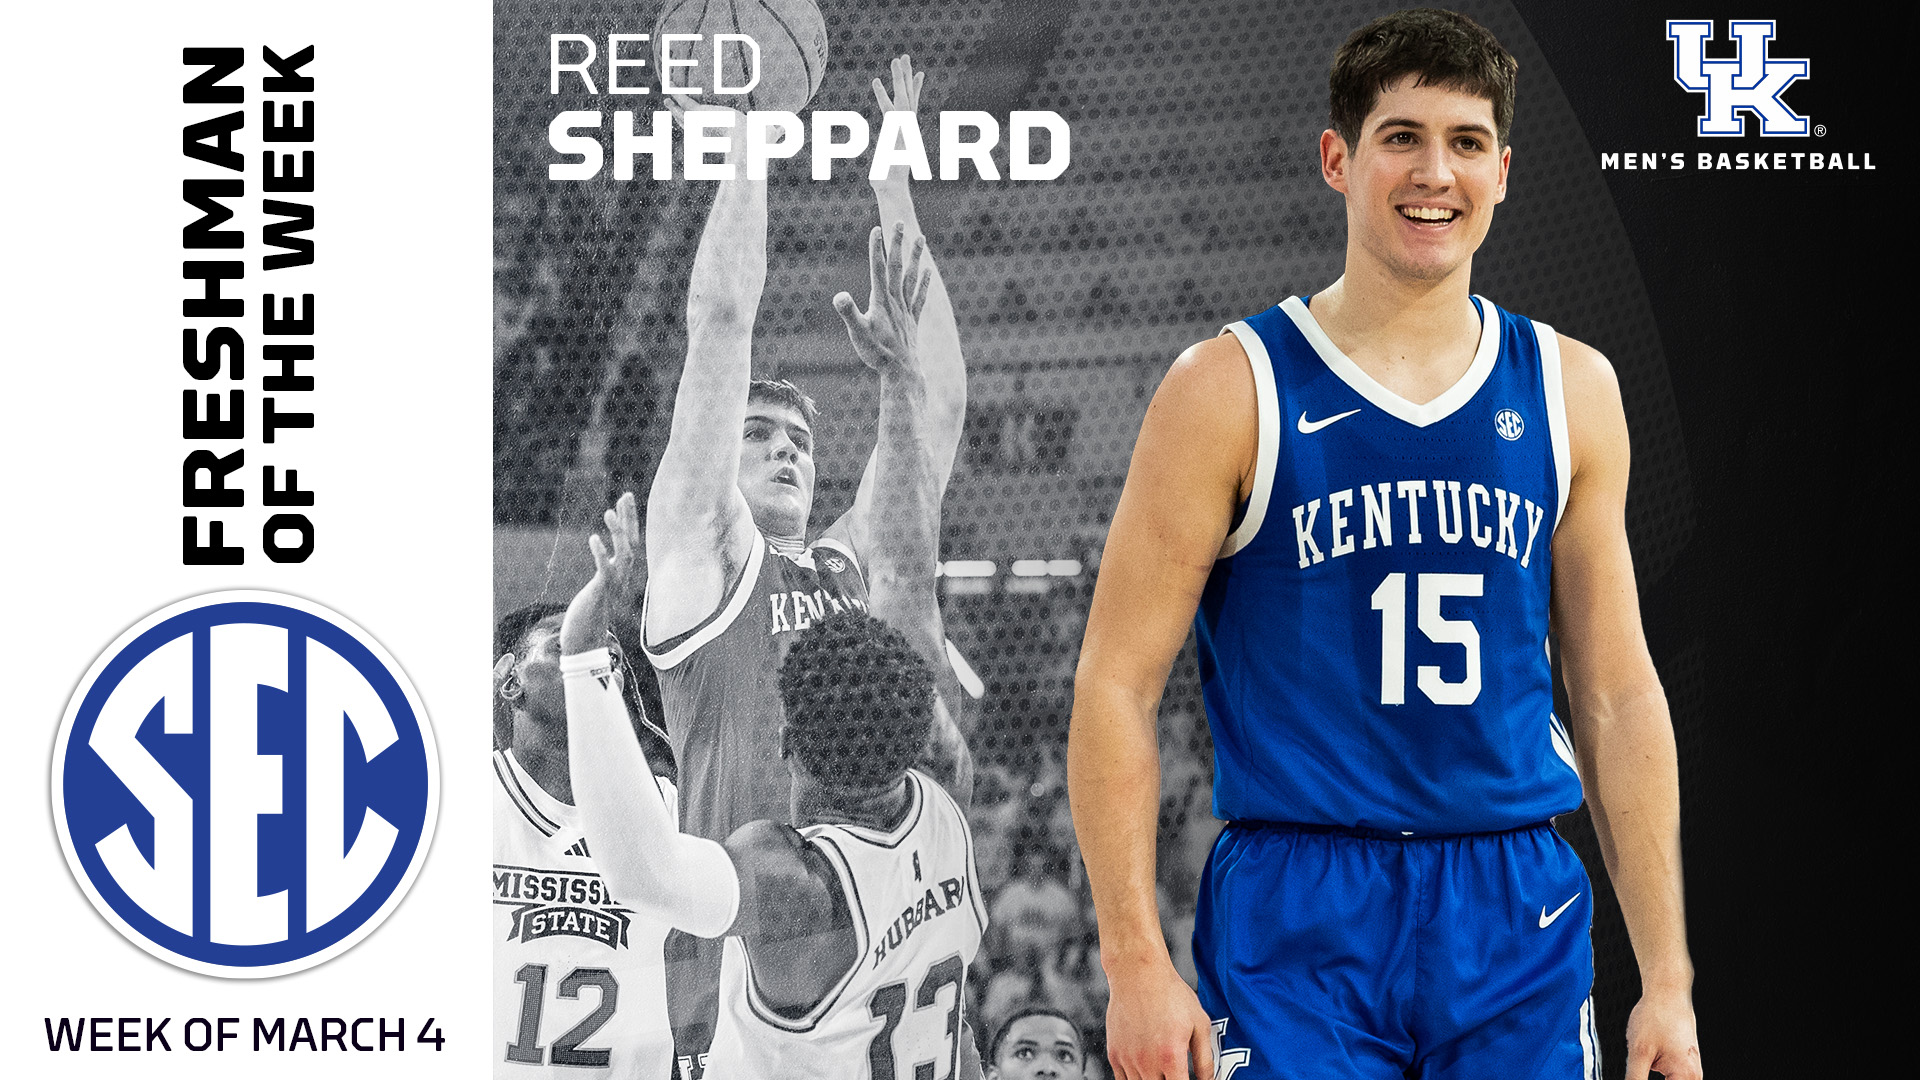 Reed Sheppard Wins SEC Freshman of the Week for Third Time